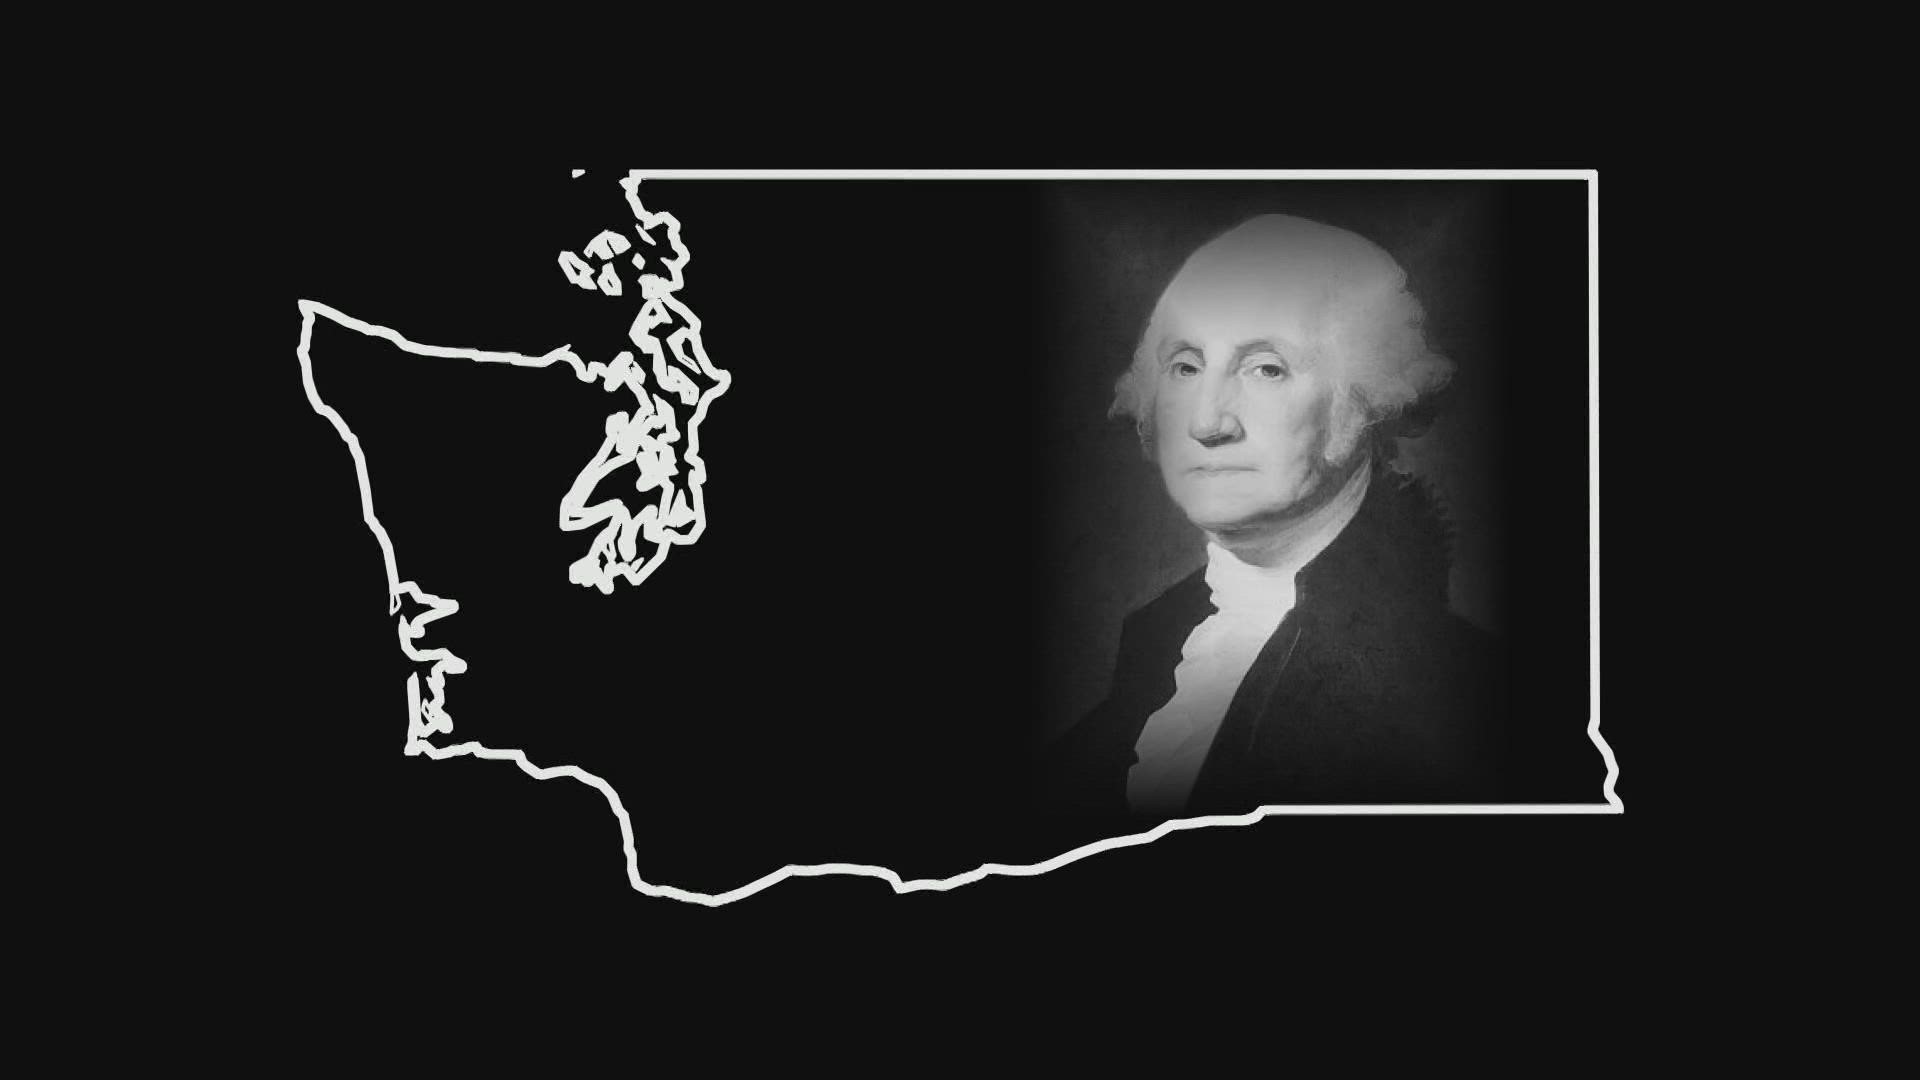 The Evergreen state was named after George Washington, but it wasn't the preferred choice from settlers looking to break away from the Oregon Territory.